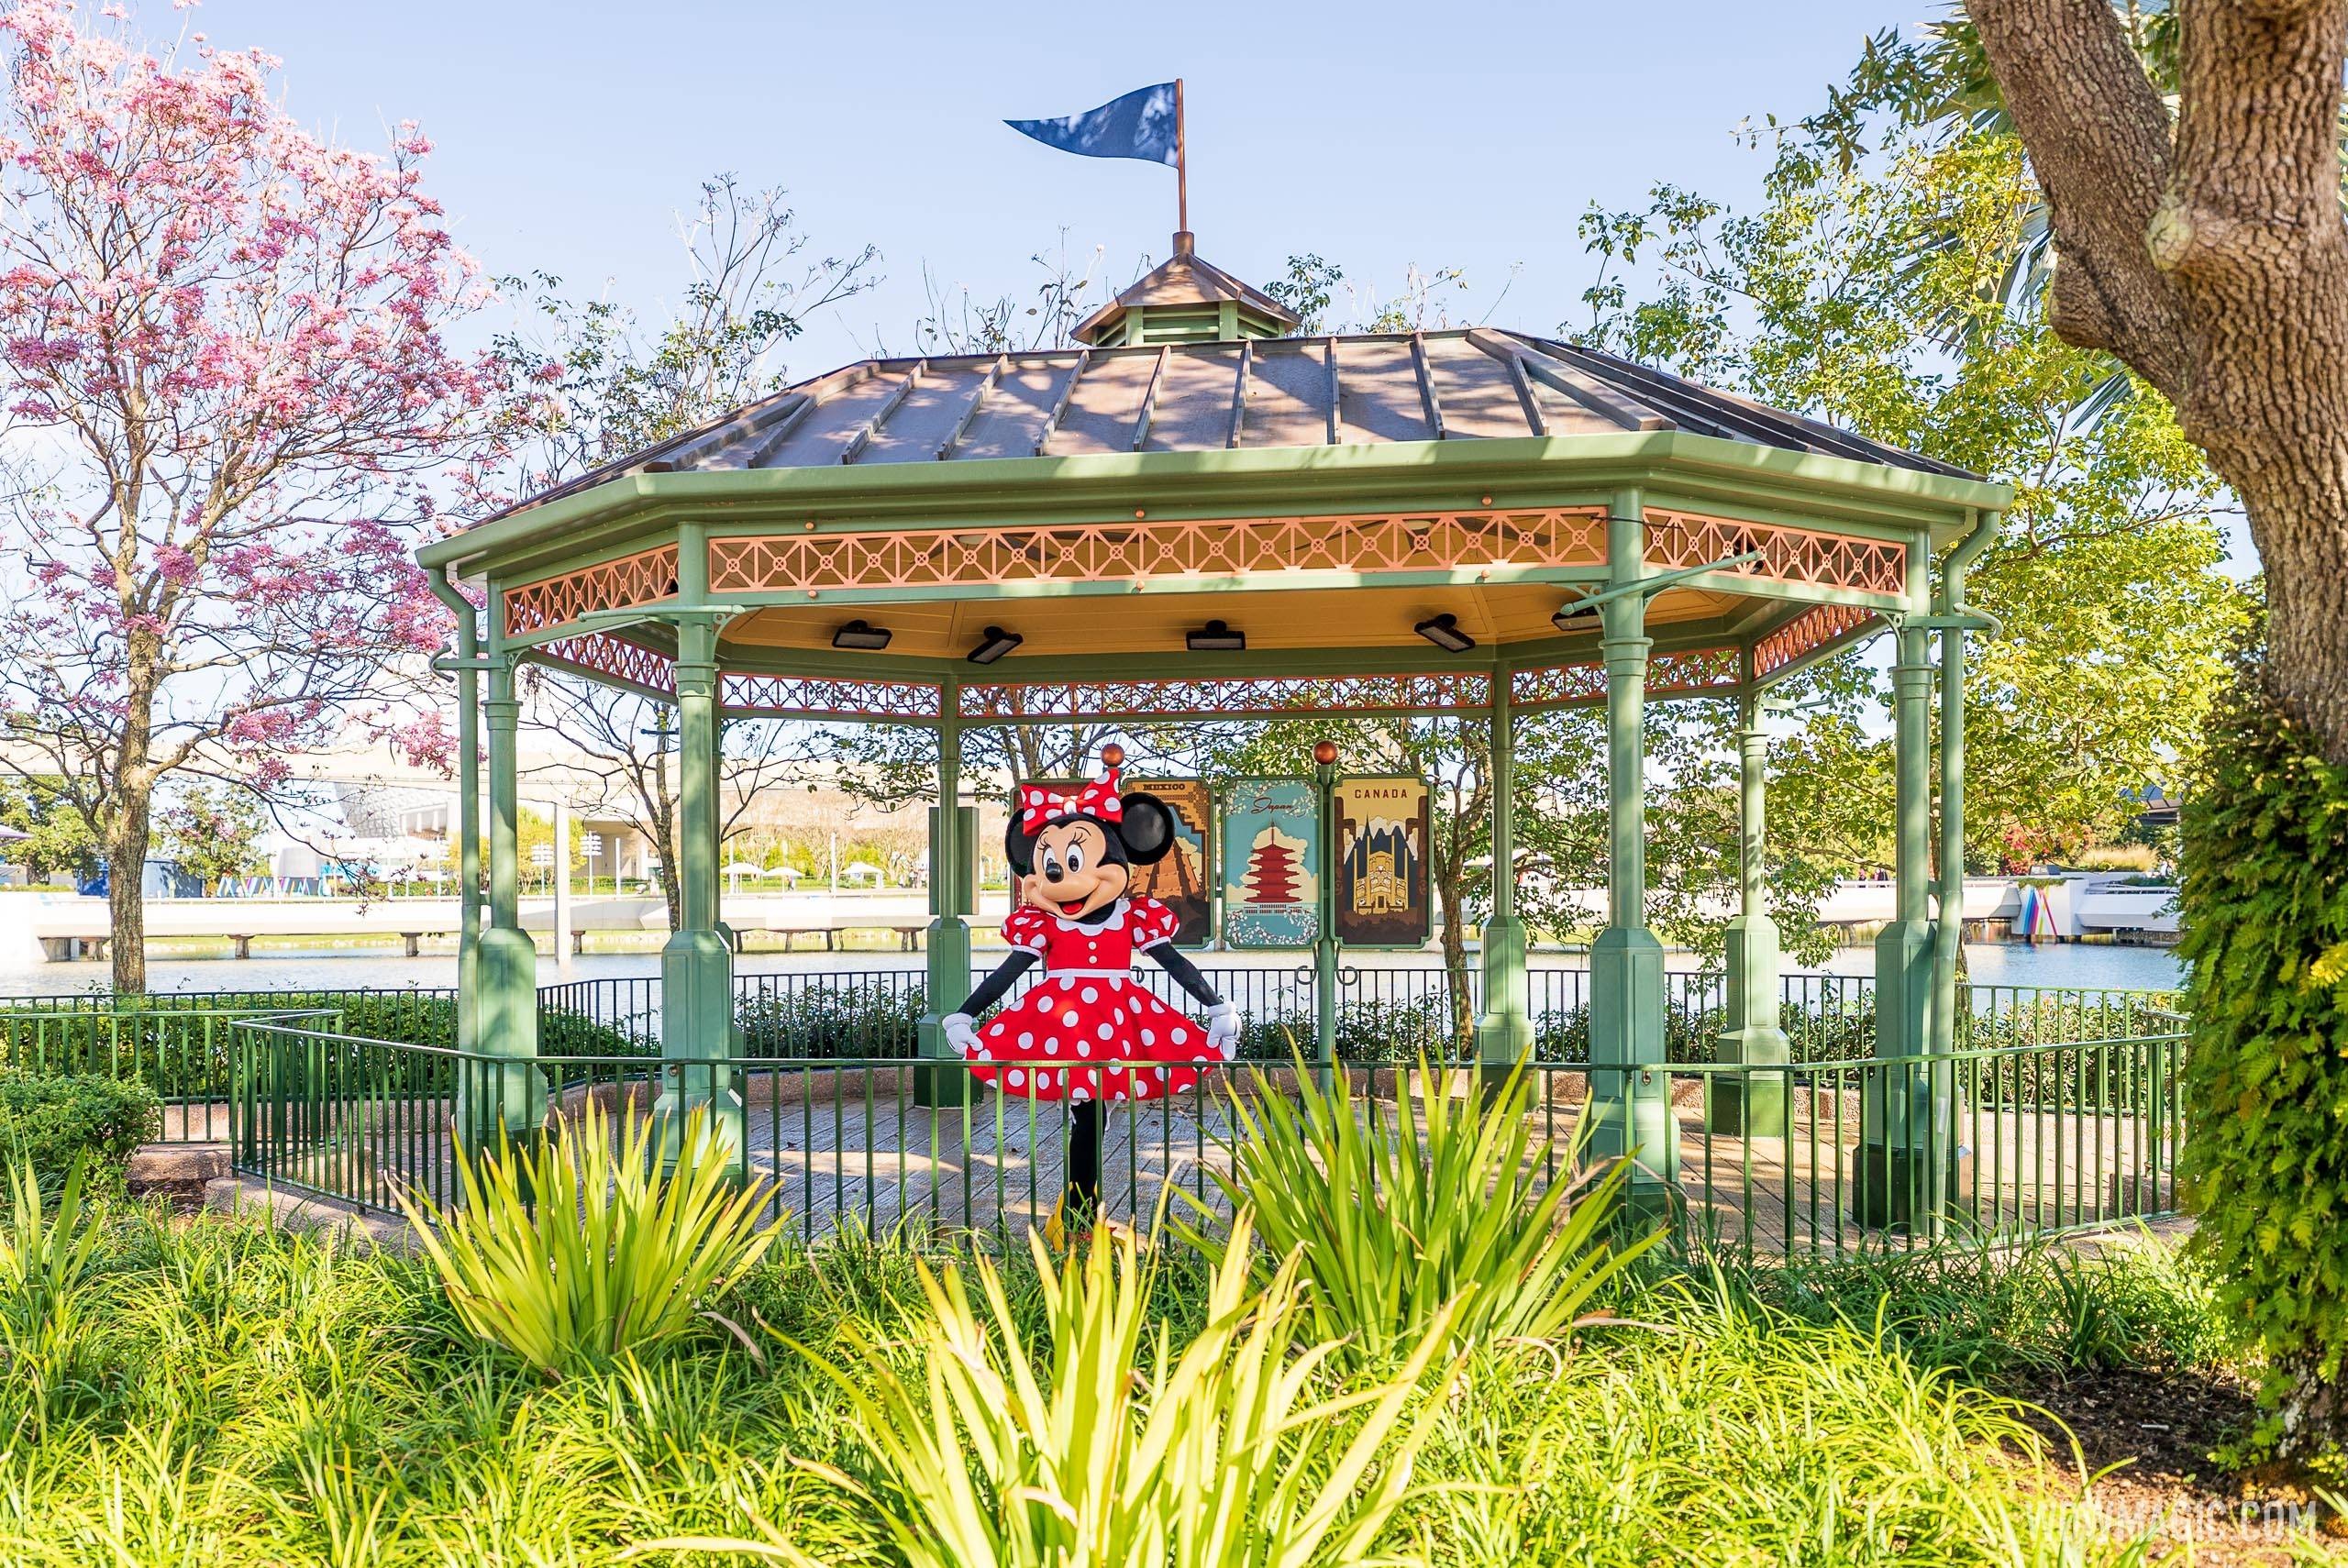 Minnie Mouse meet and greet at the EPCOT World Showcase Gazebo